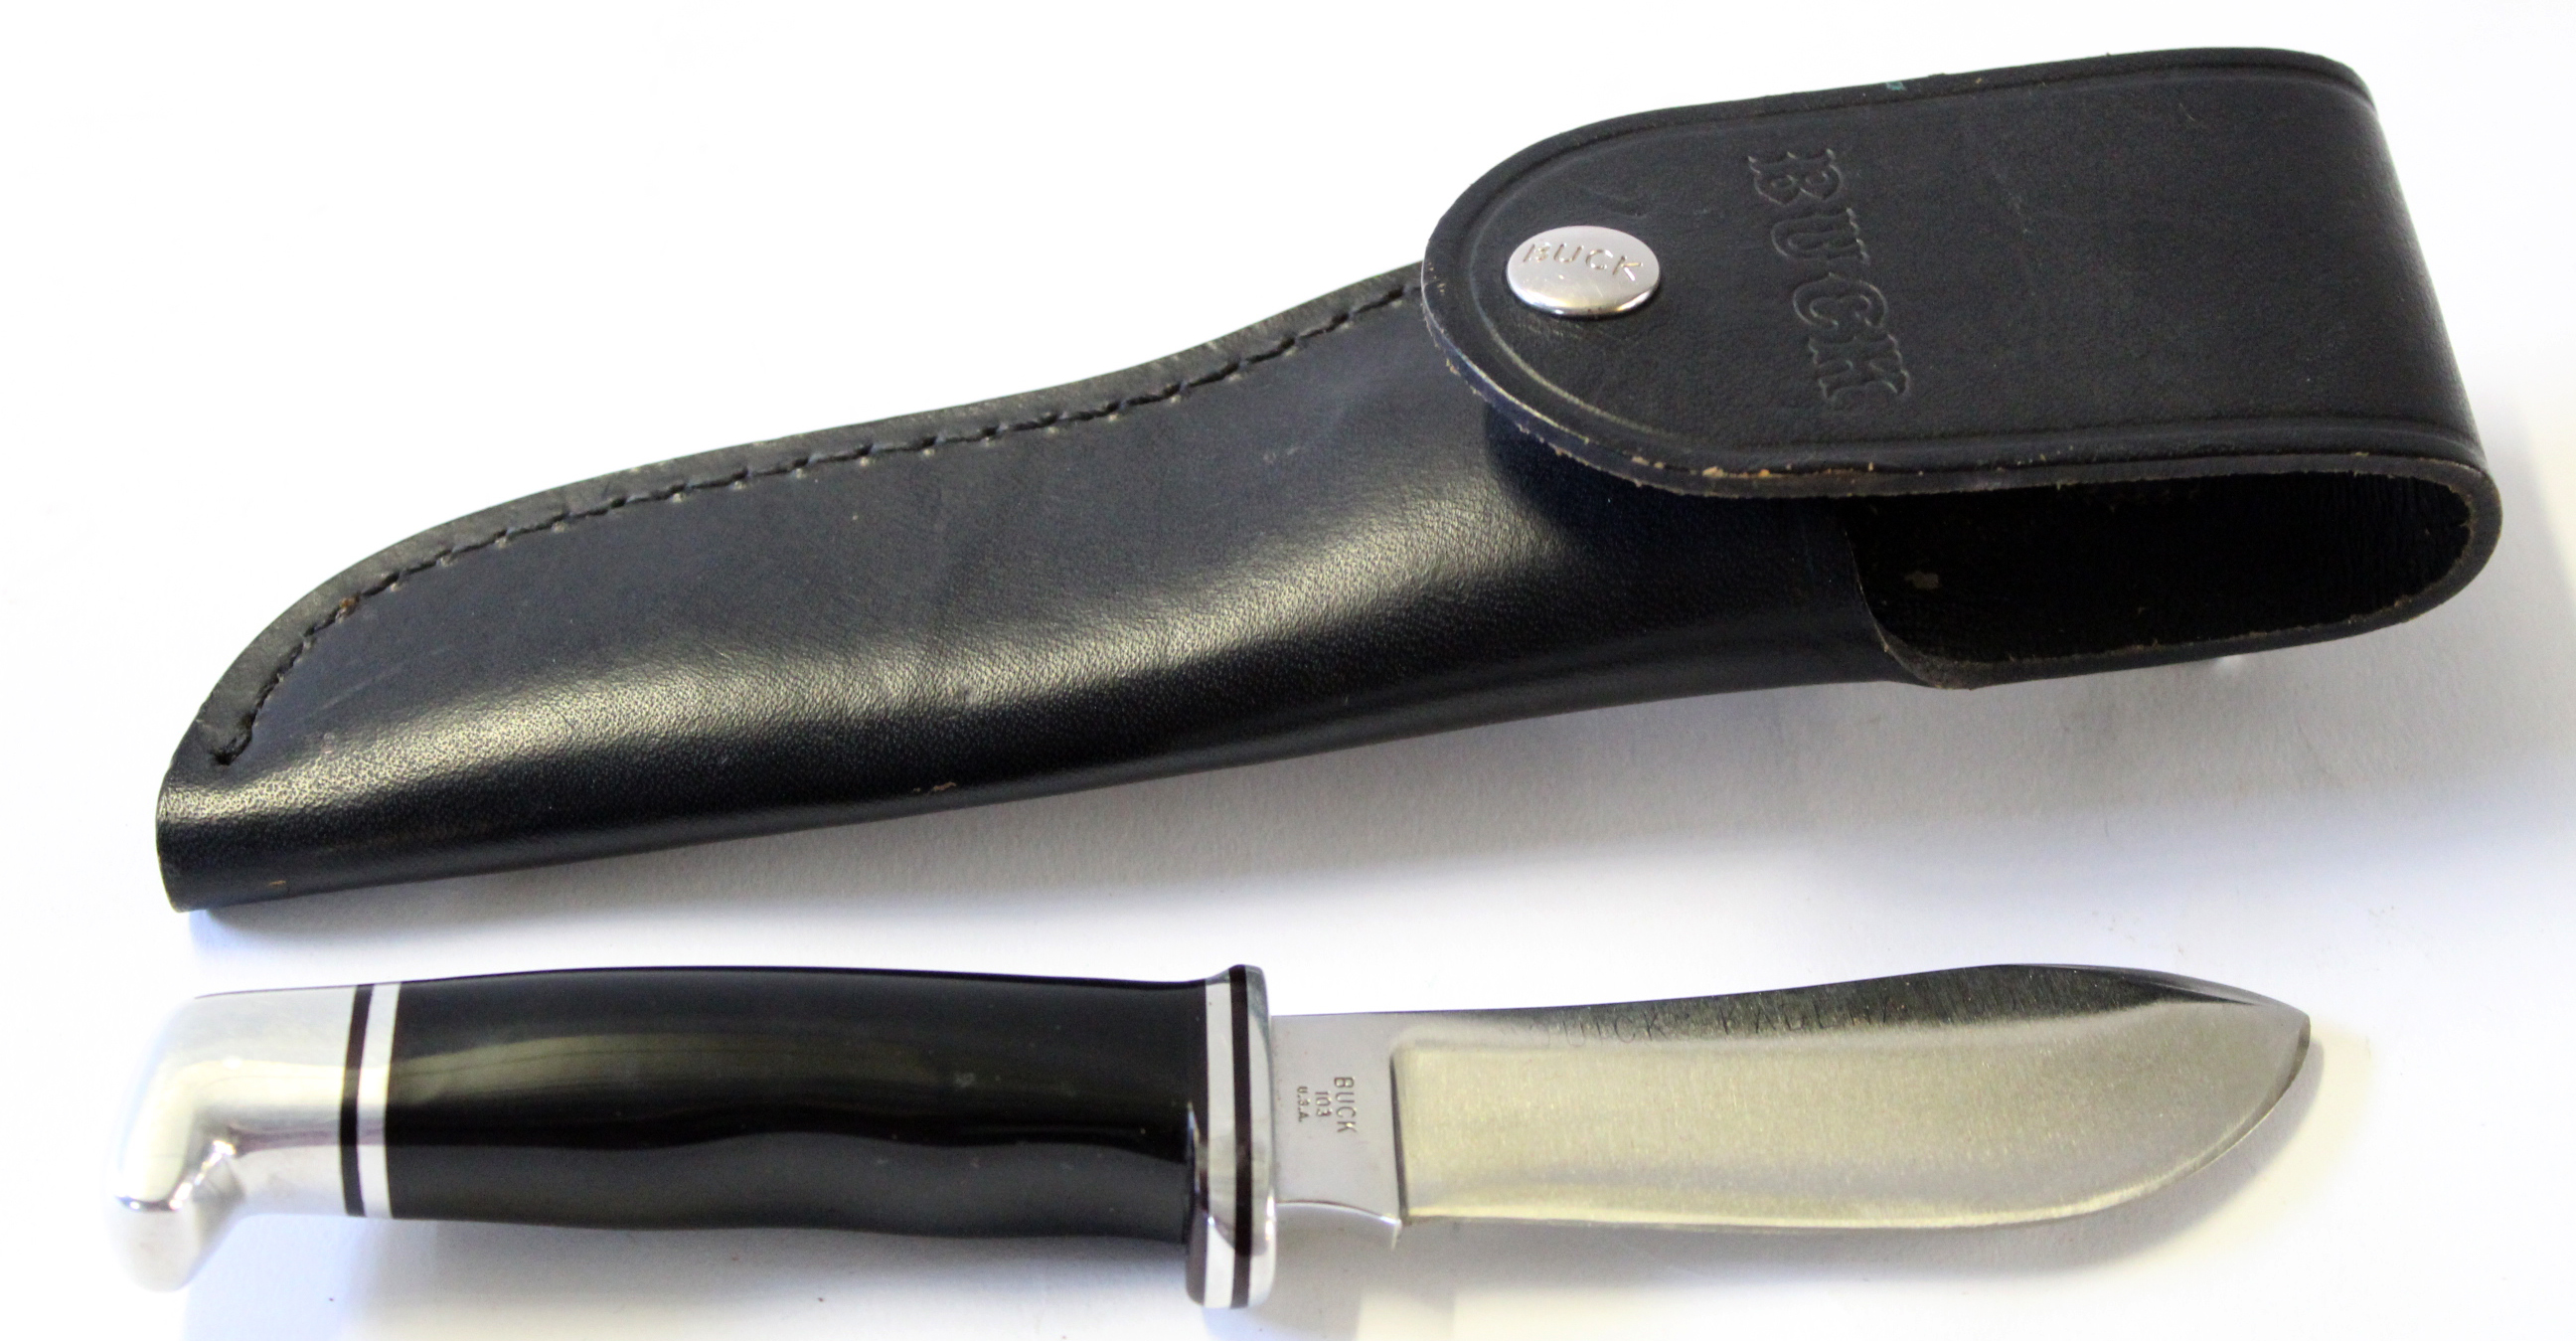 Buck (USA) skinning knife, blade length approx 10cm, complete with sheath, made of bronze - Image 4 of 4